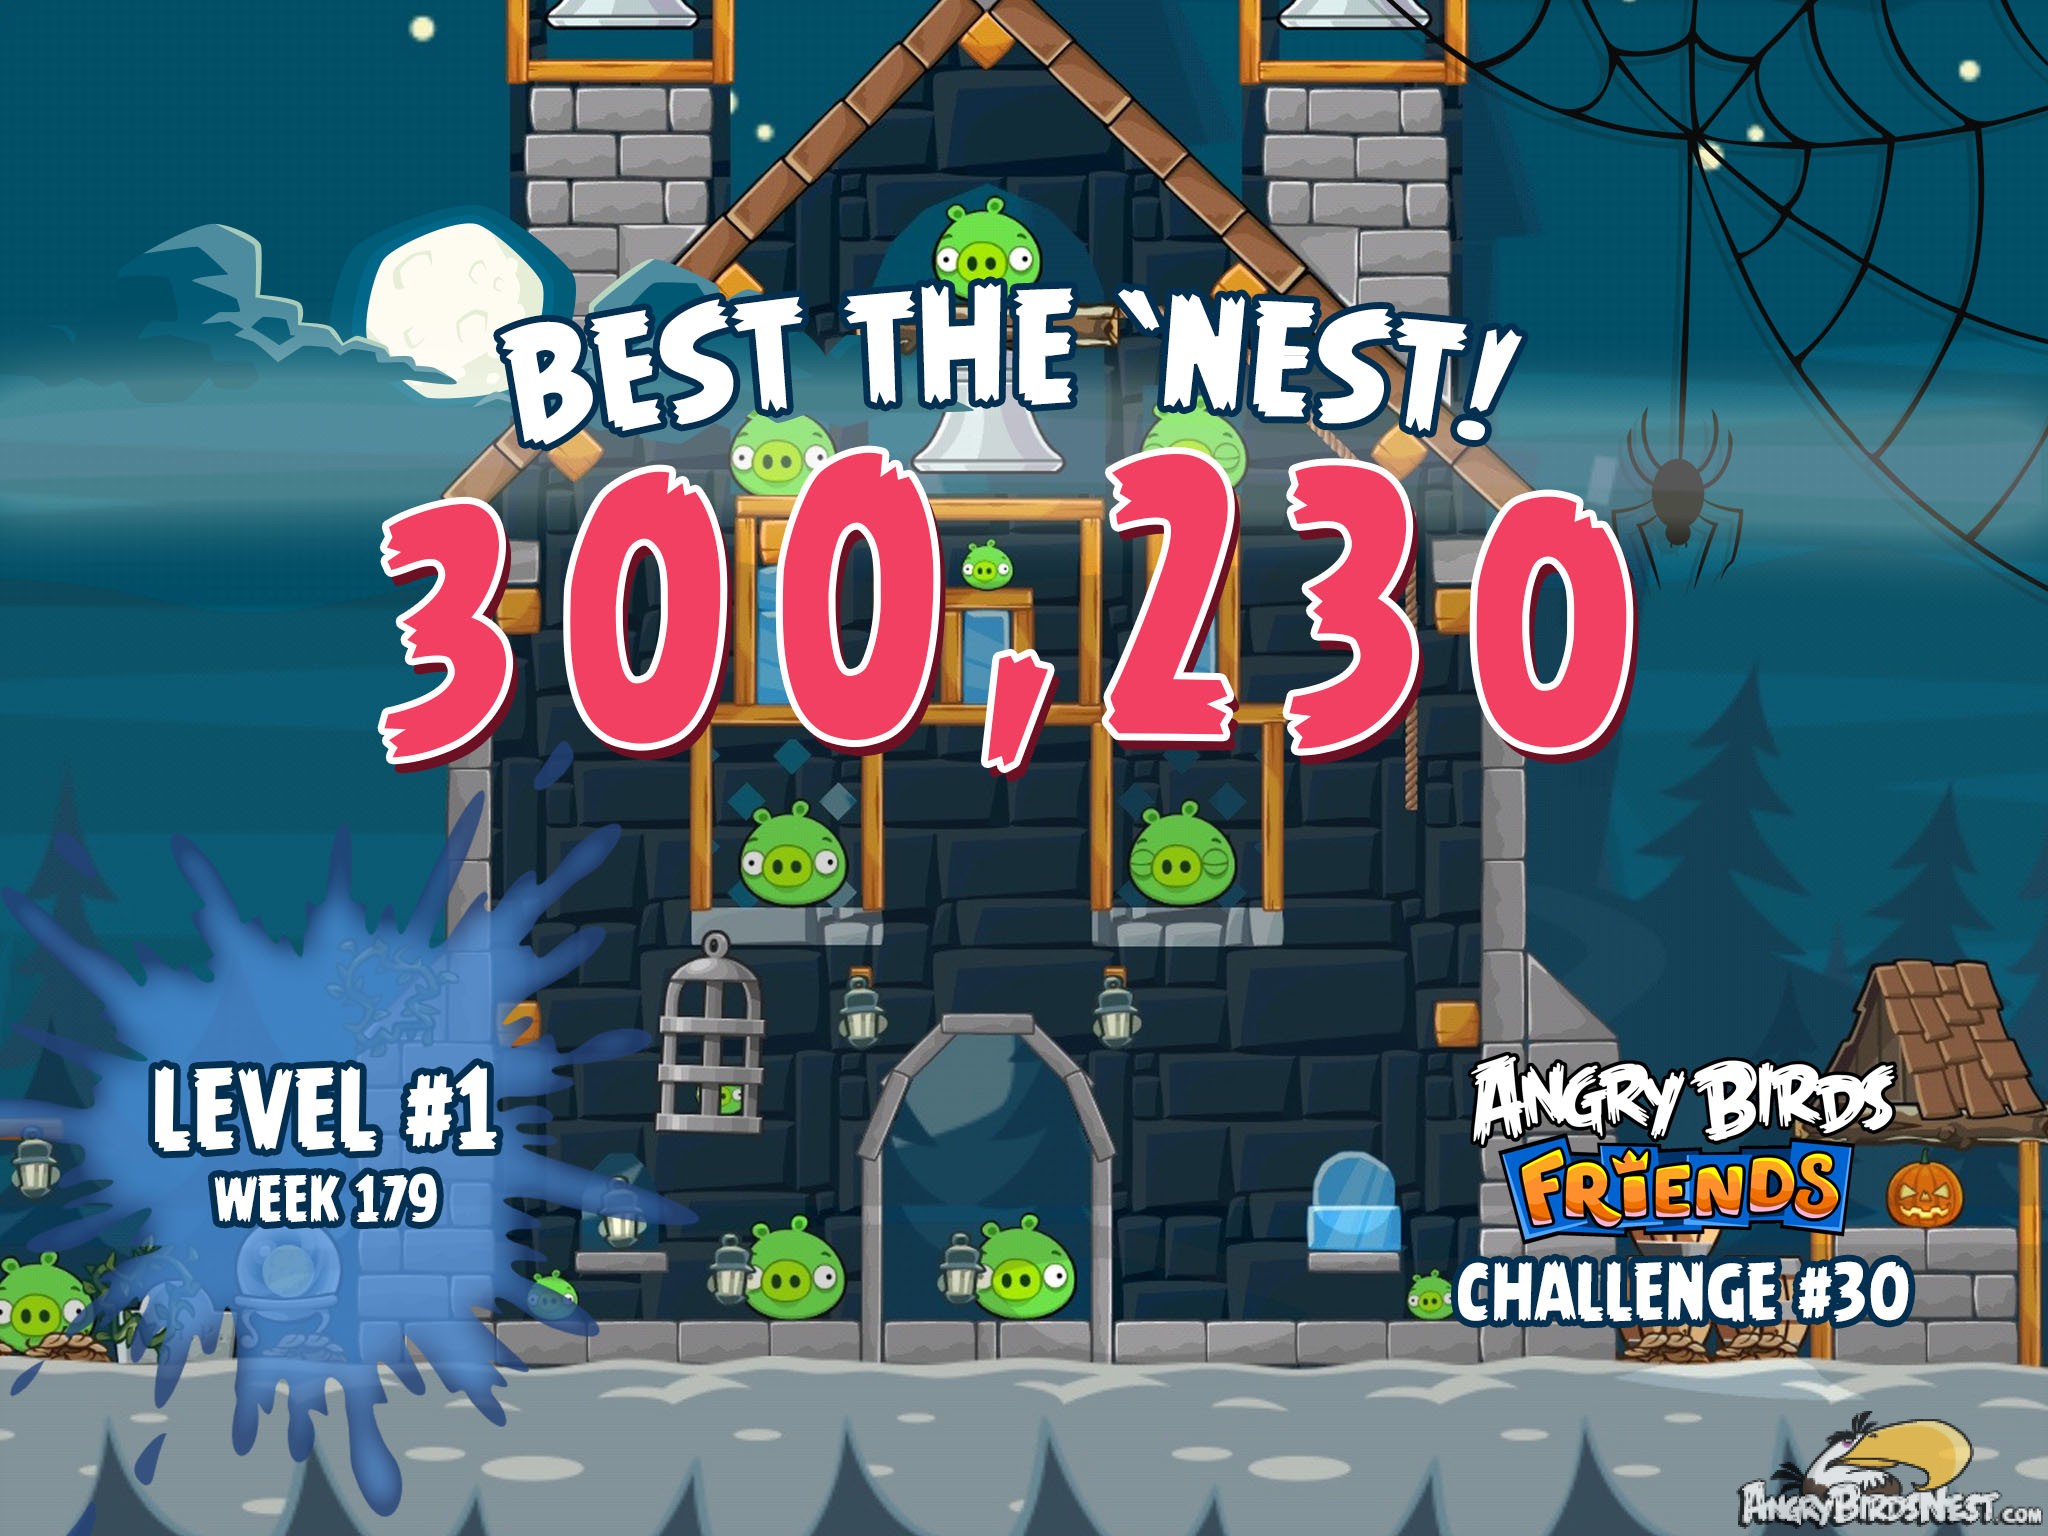 Angry Birds Friends Best the Nest Challenge Week 30